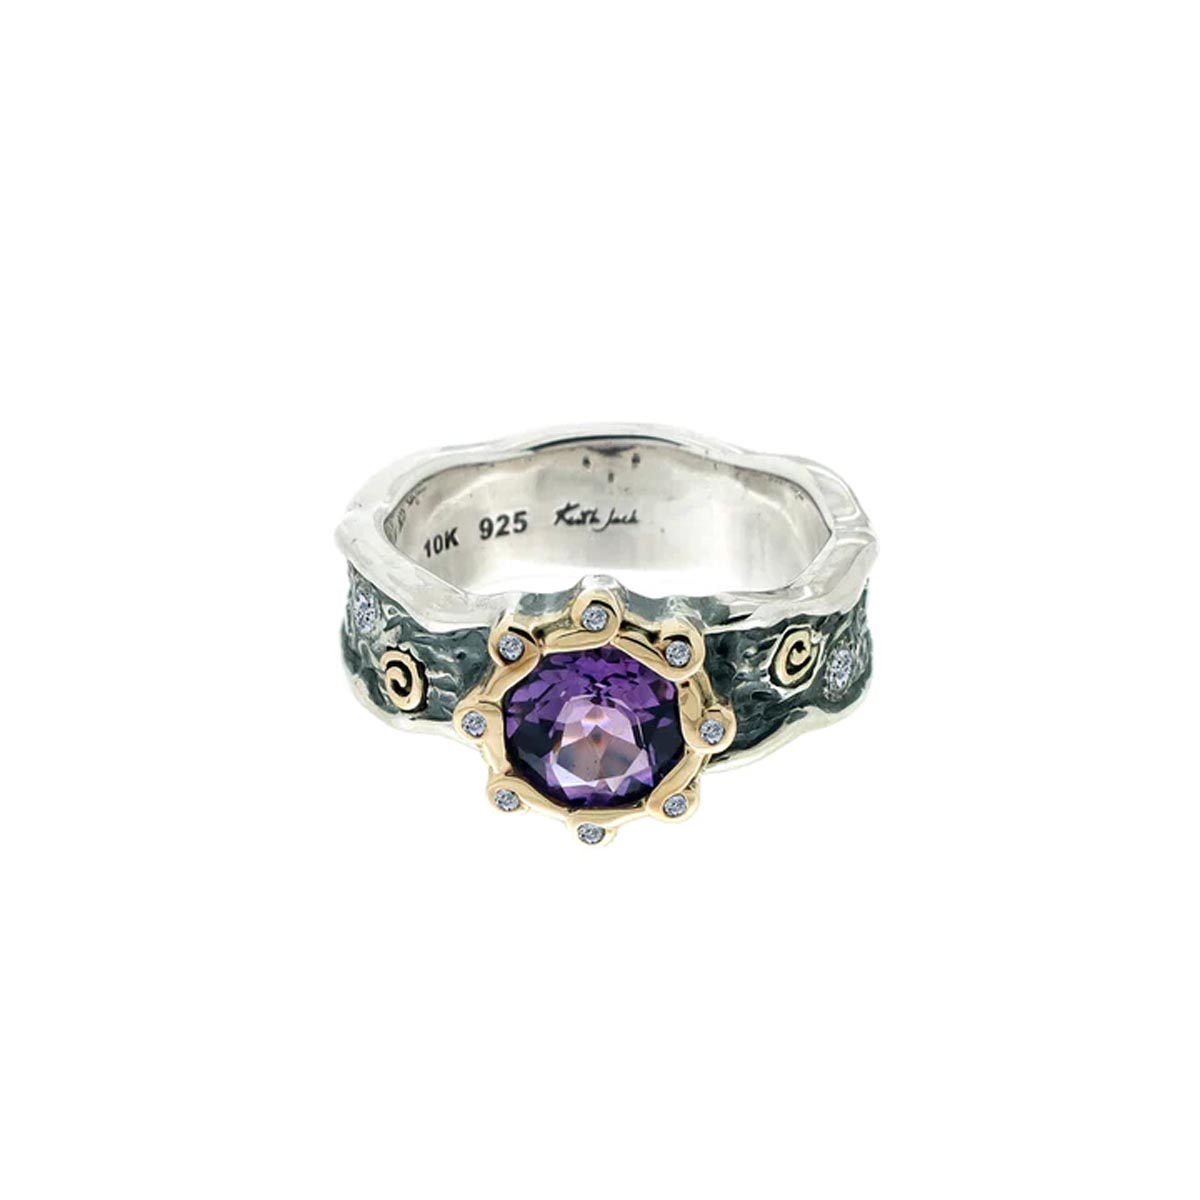 Keith Jack Rocks n Rivers Amethyst Ring in Sterling Silver and 10kt Yellow Gold with Cubic Zirconia (size 8)